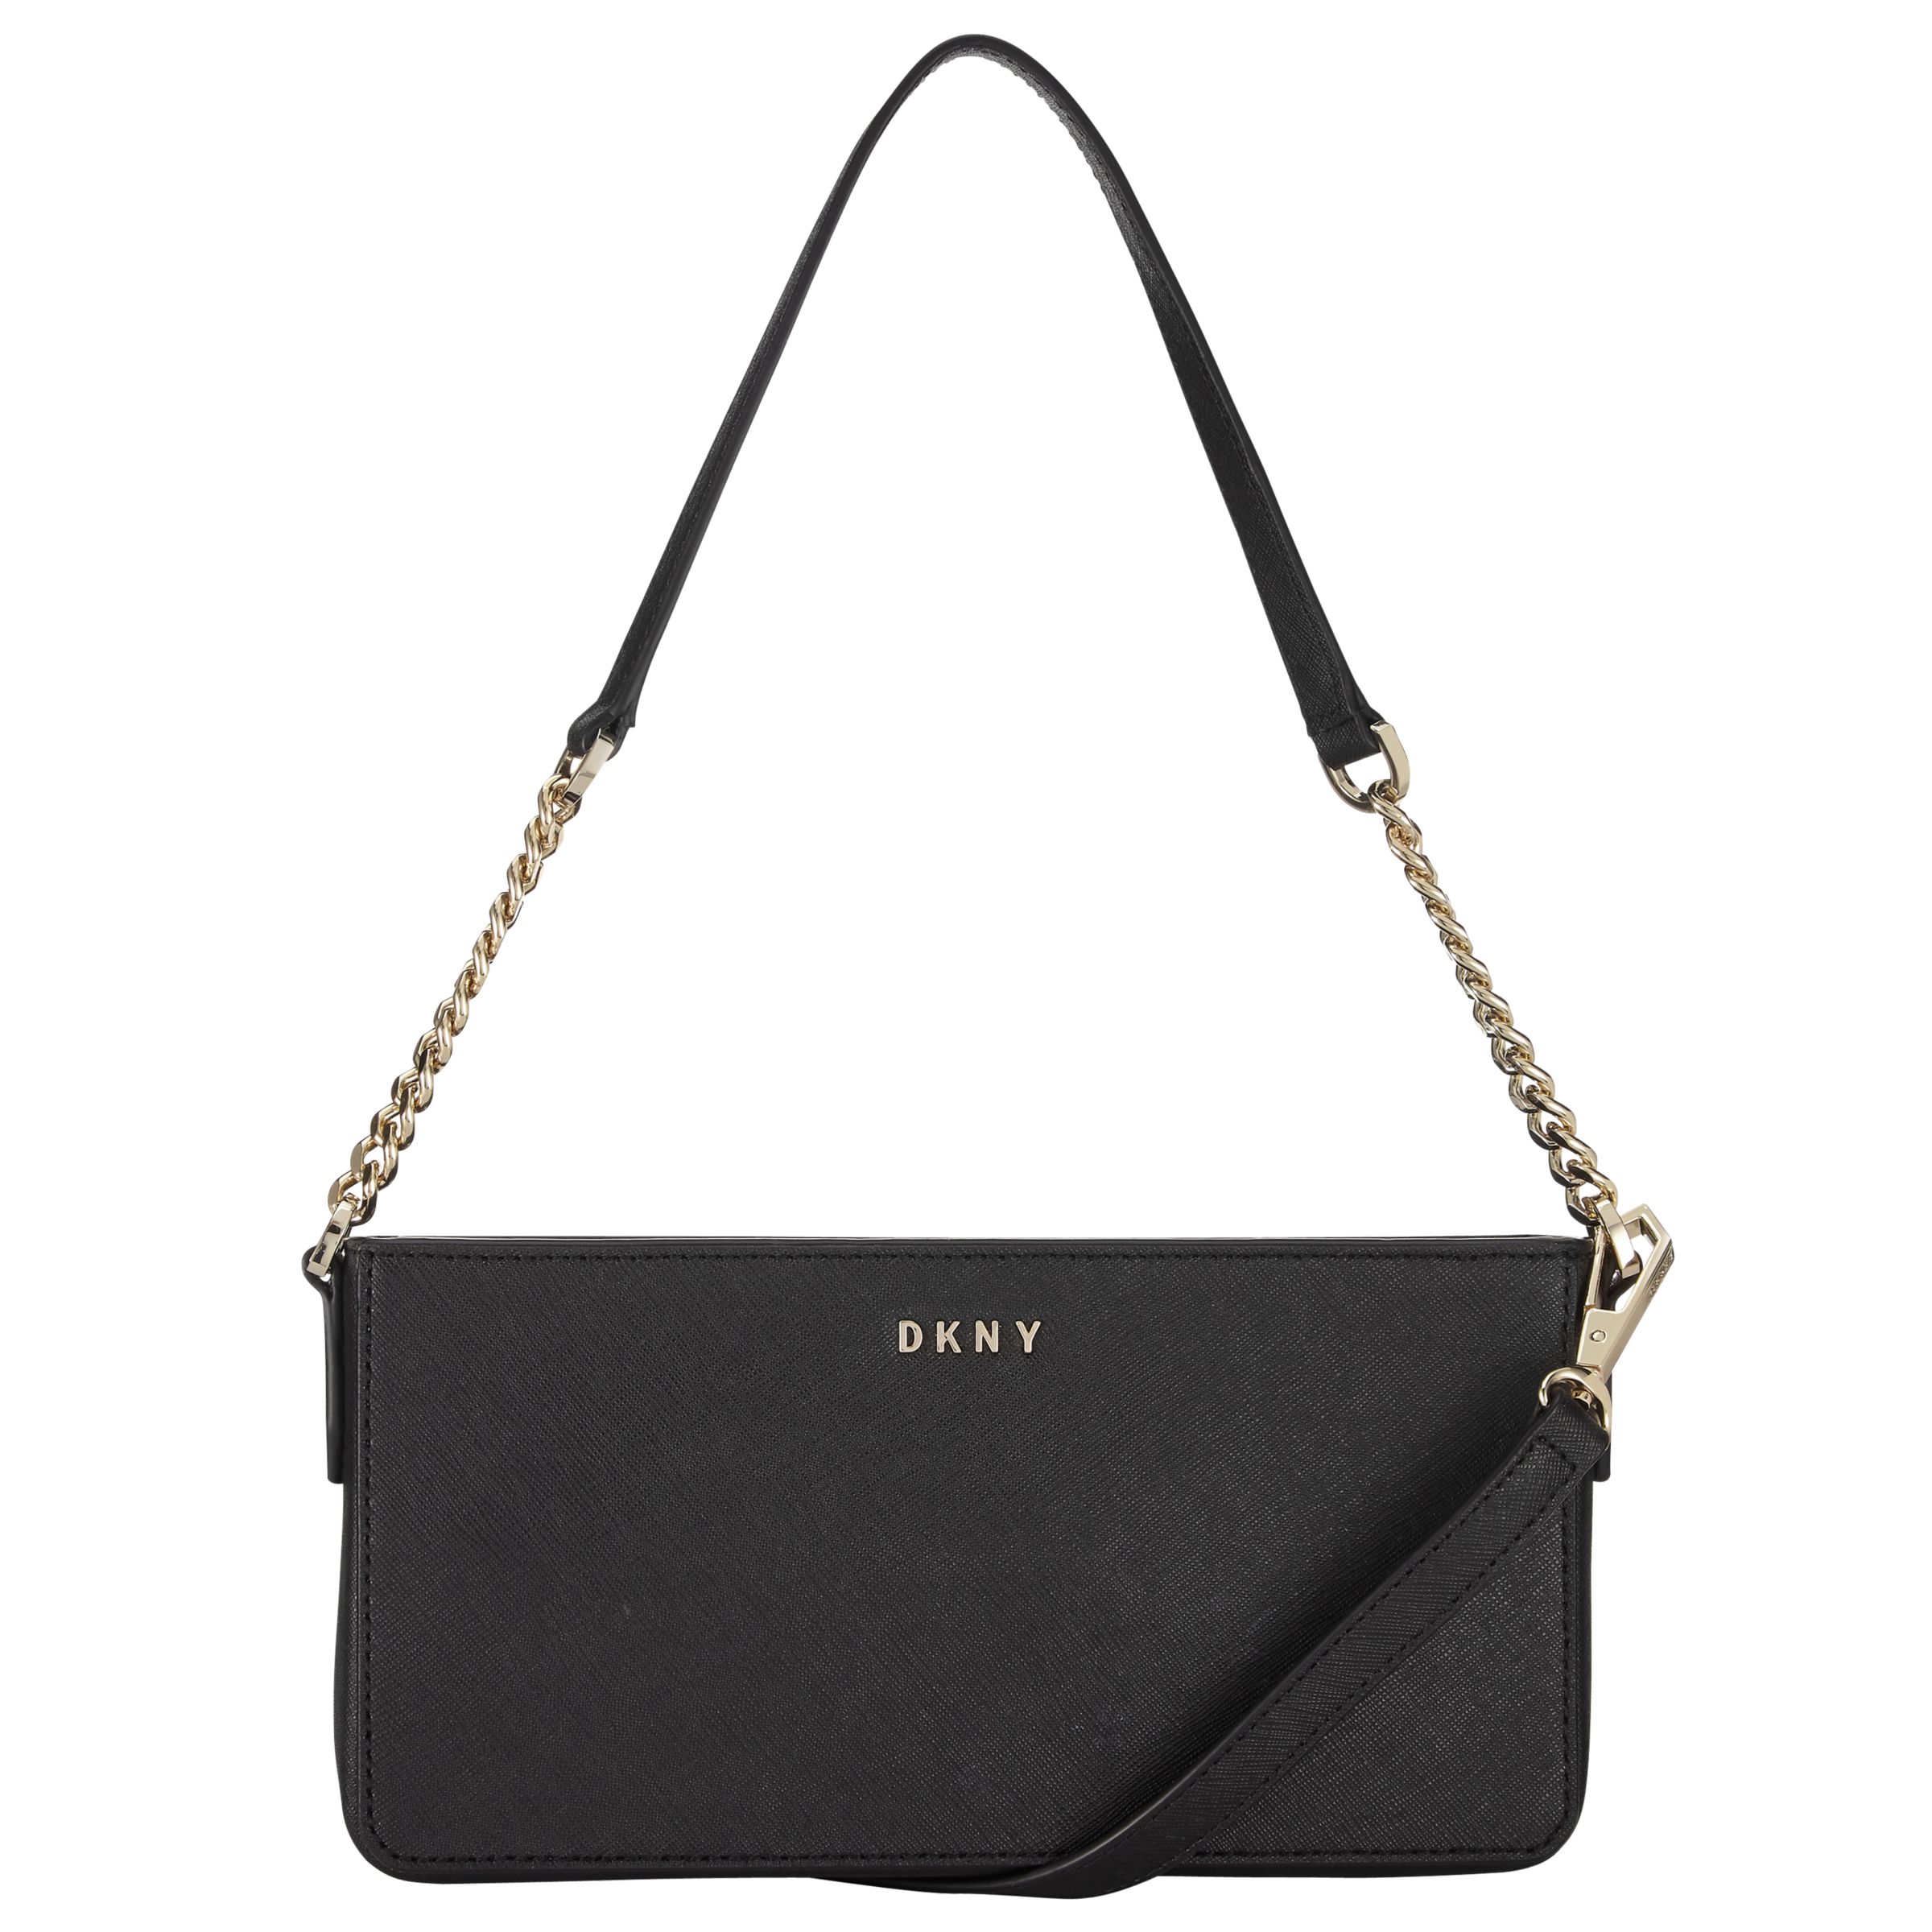 black cross body bag with chain strap